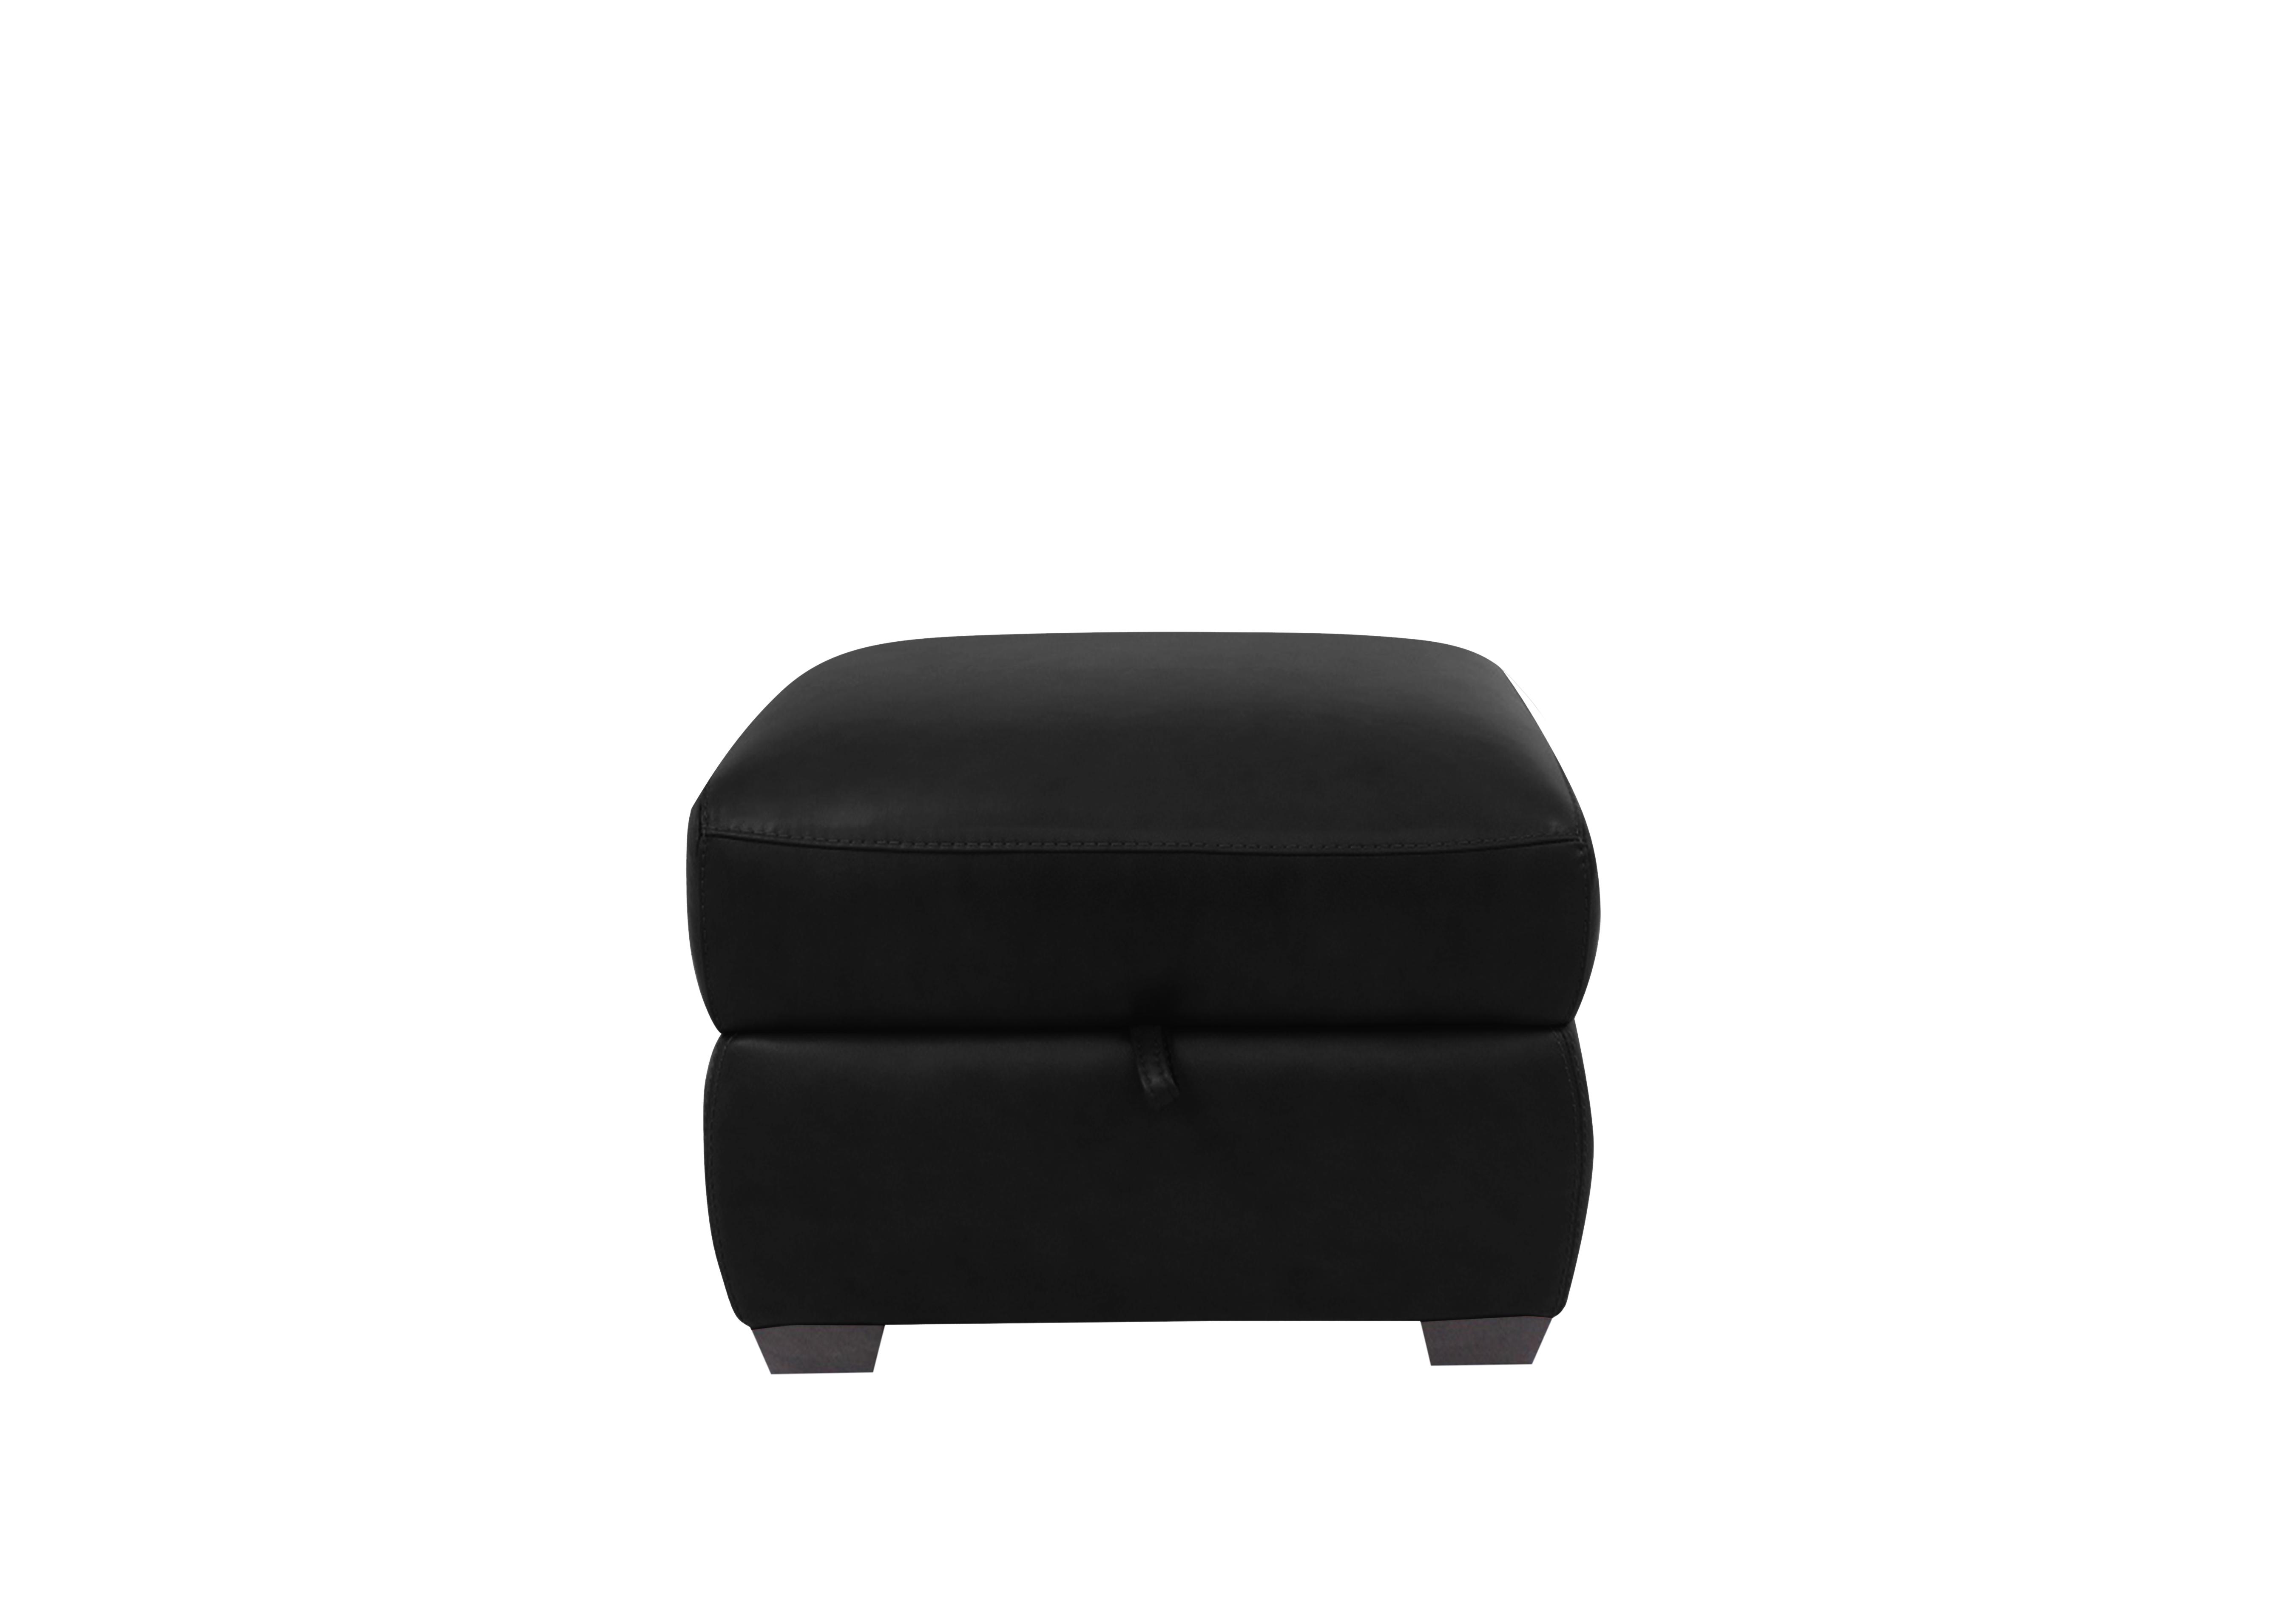 Cozee Leather Storage Stool in Bv-3500 Classic Black on Furniture Village